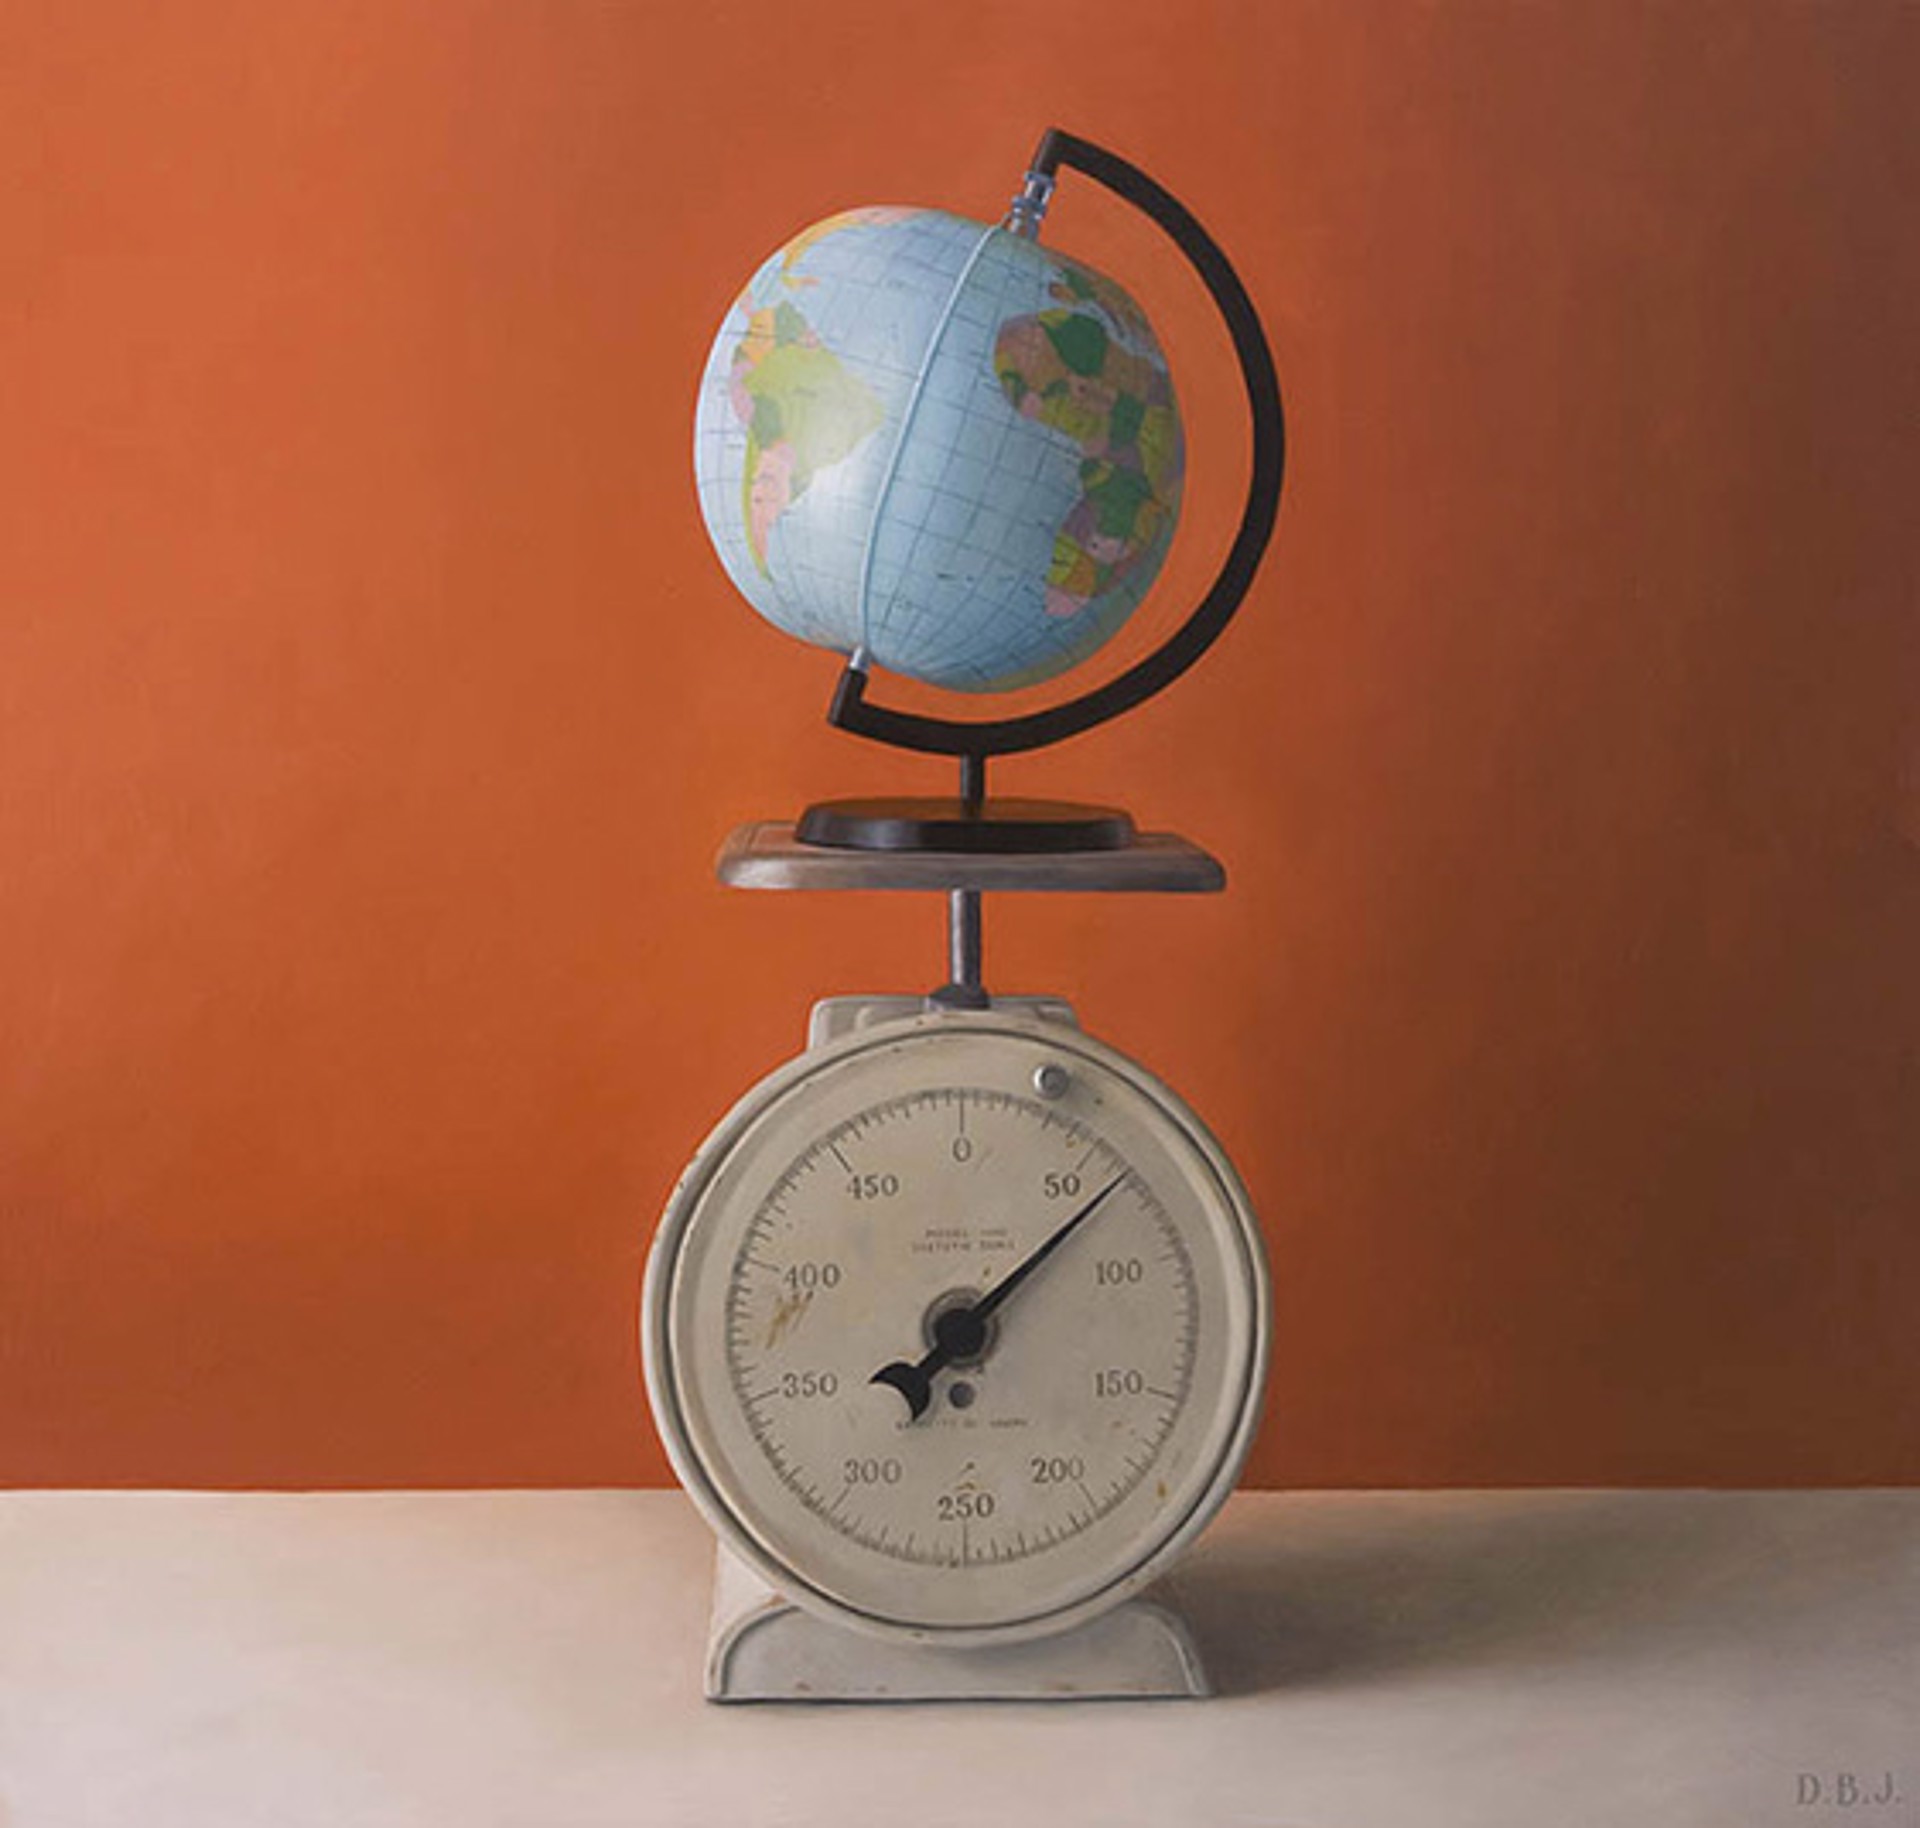 Weight of the World by Dan Jackson